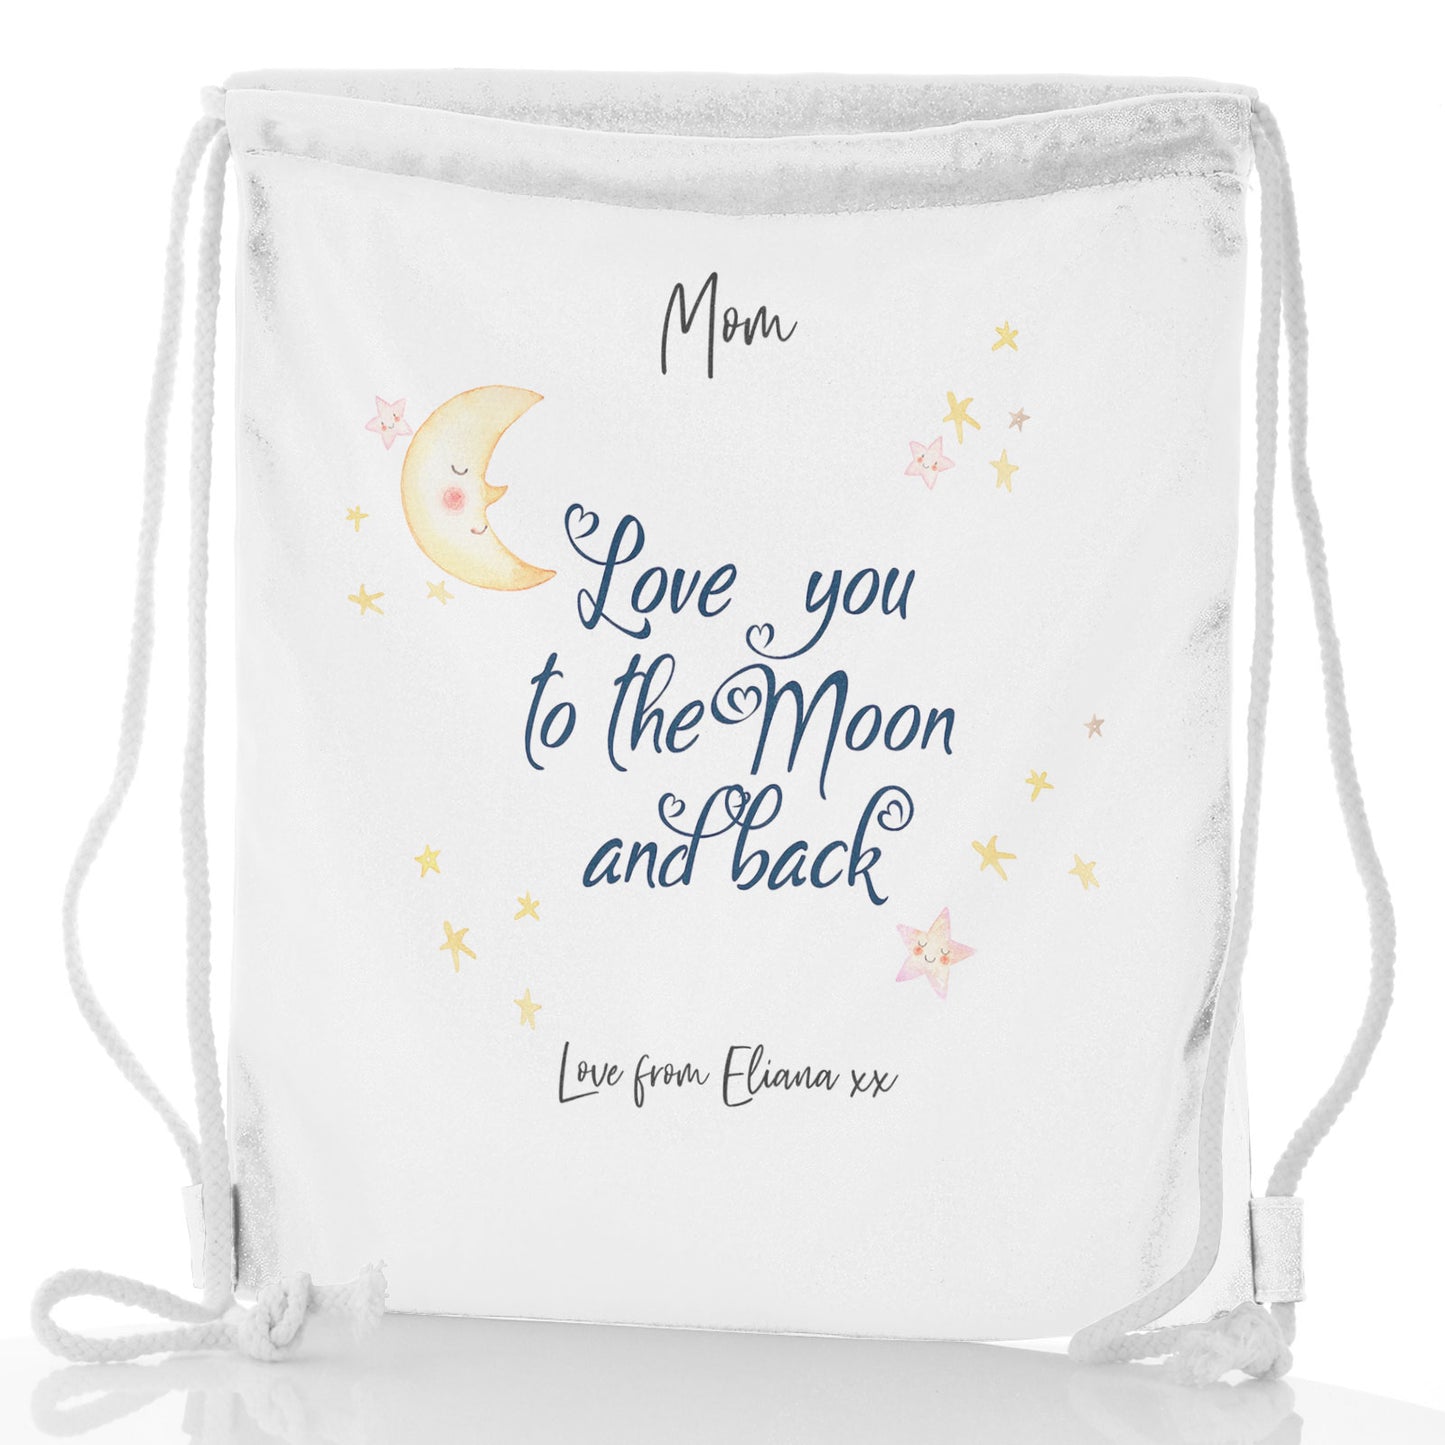 Personalised Glitter Drawstring Backpack with Stylish Text and Moon Love Message